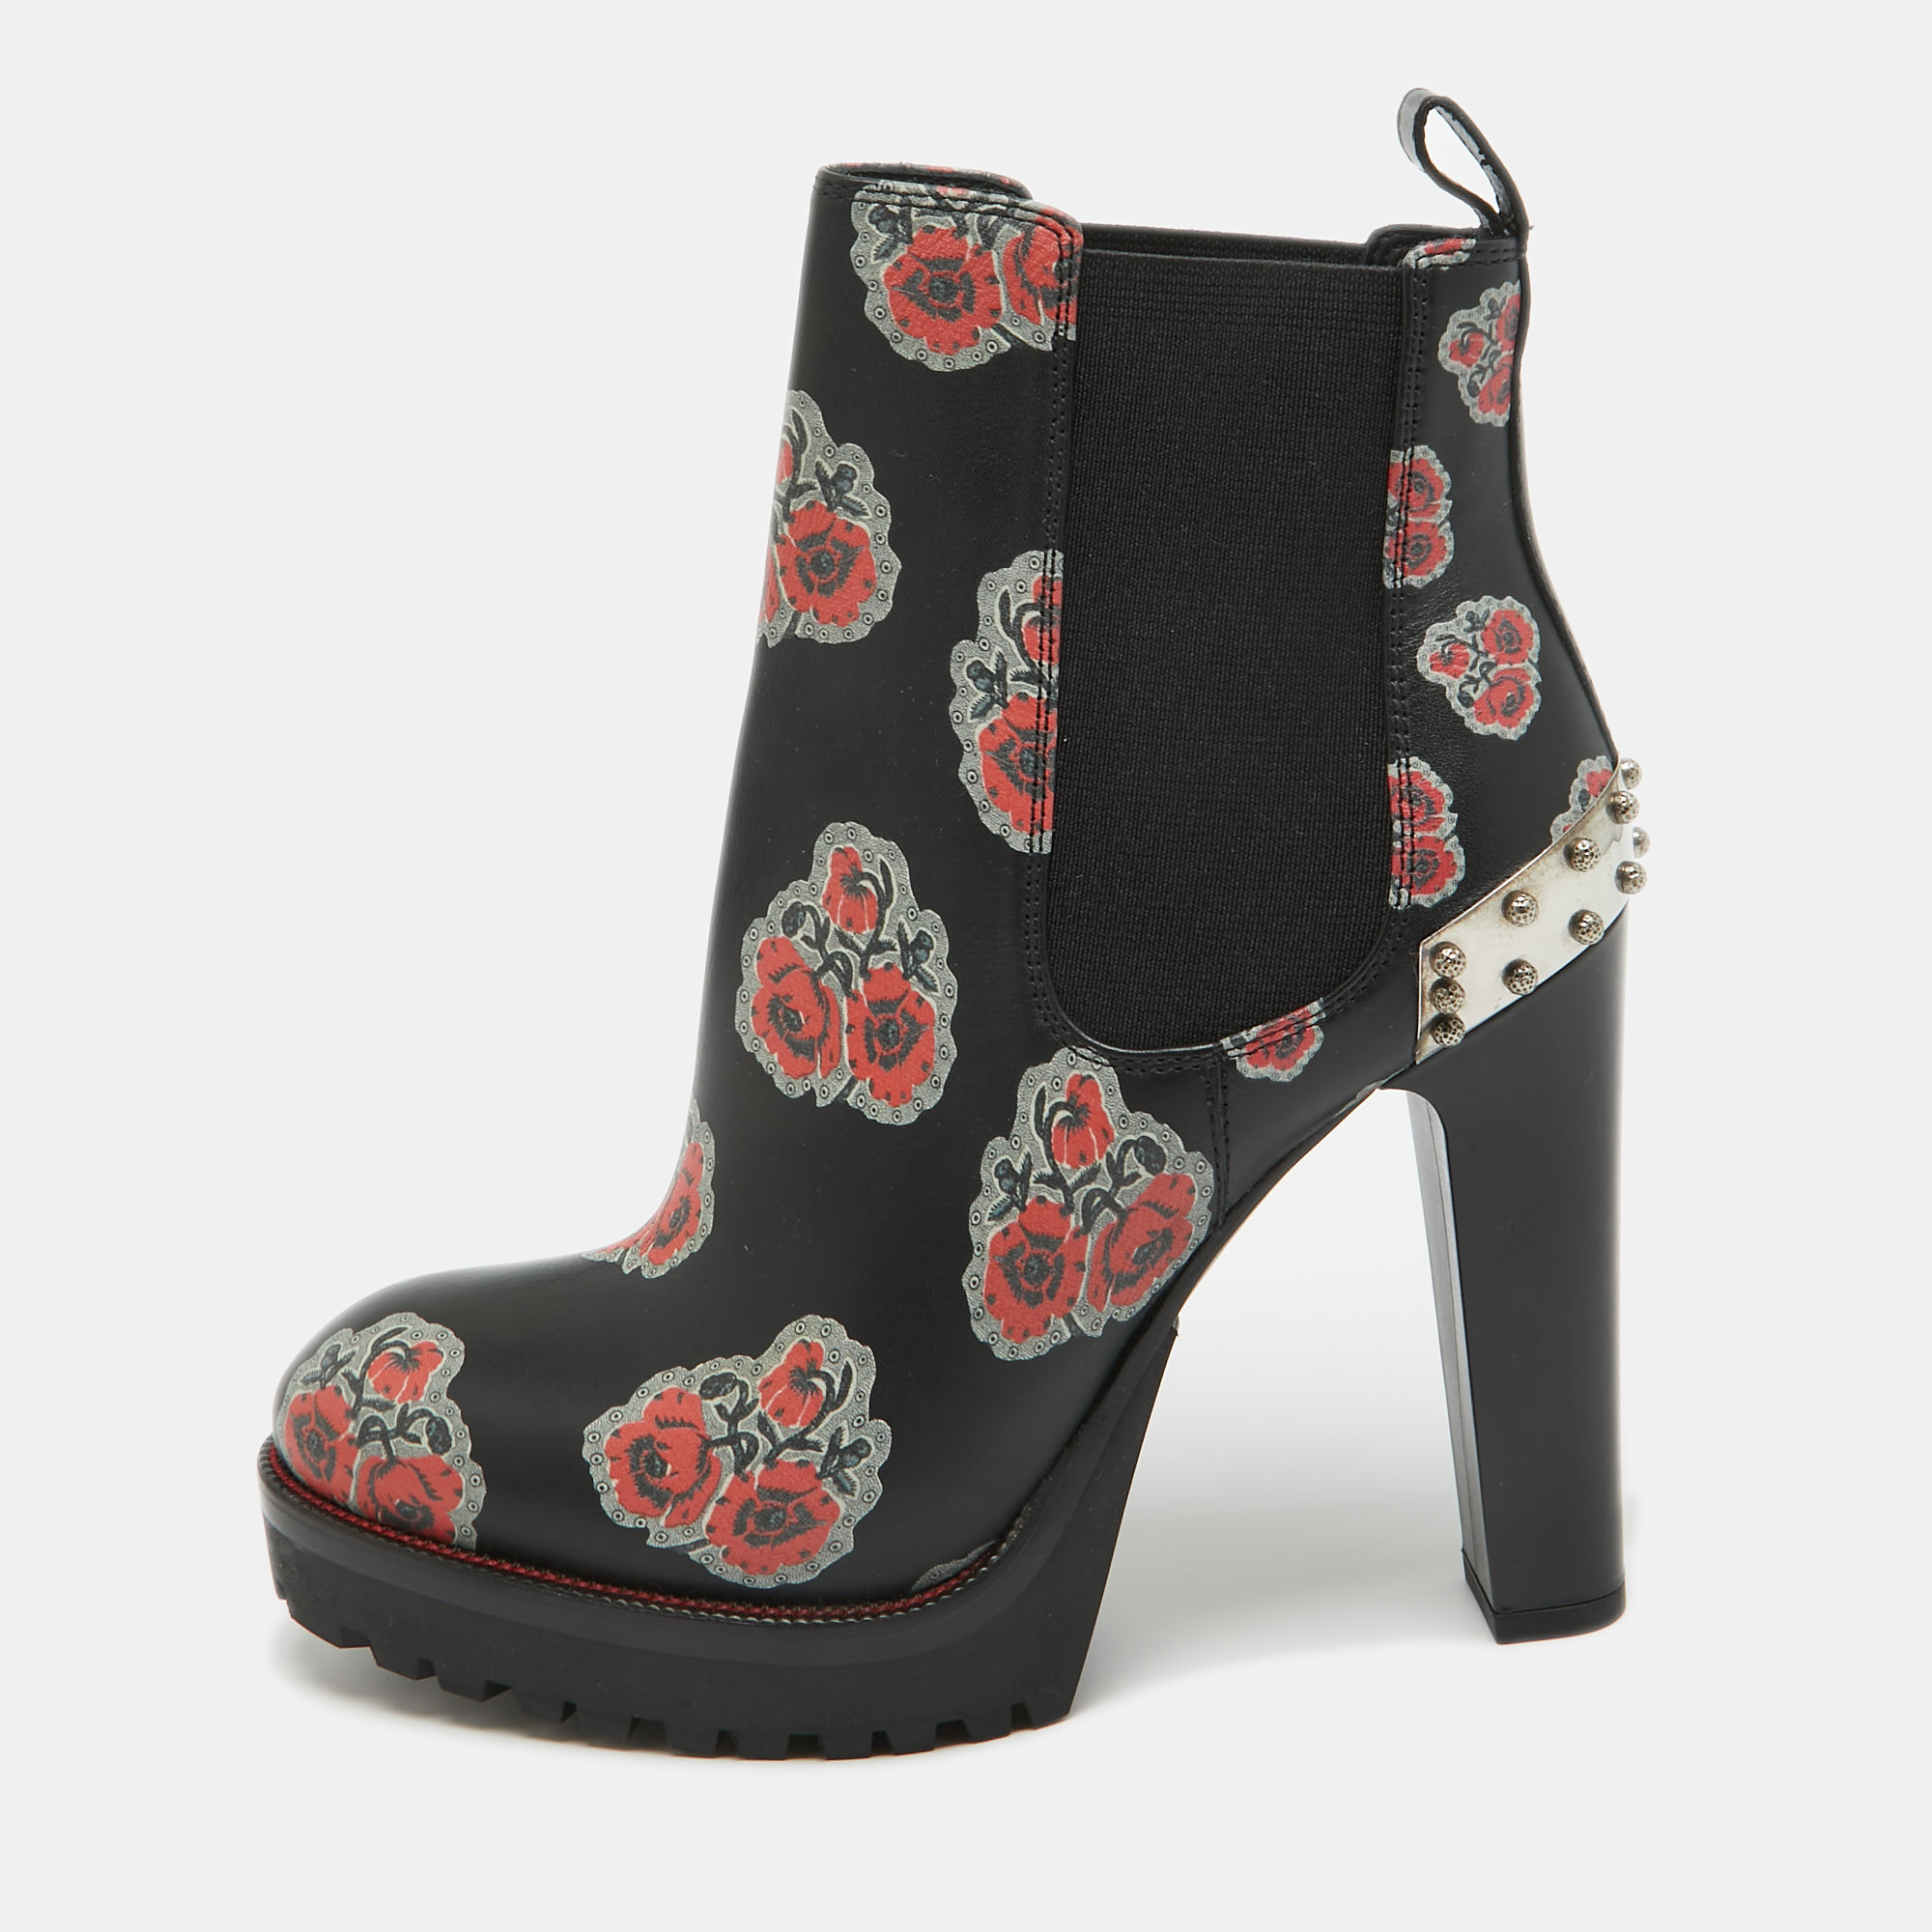 Pre-owned Alexander Mcqueen Black/red Floral Print Leather Studded Ankle Boots Size 36